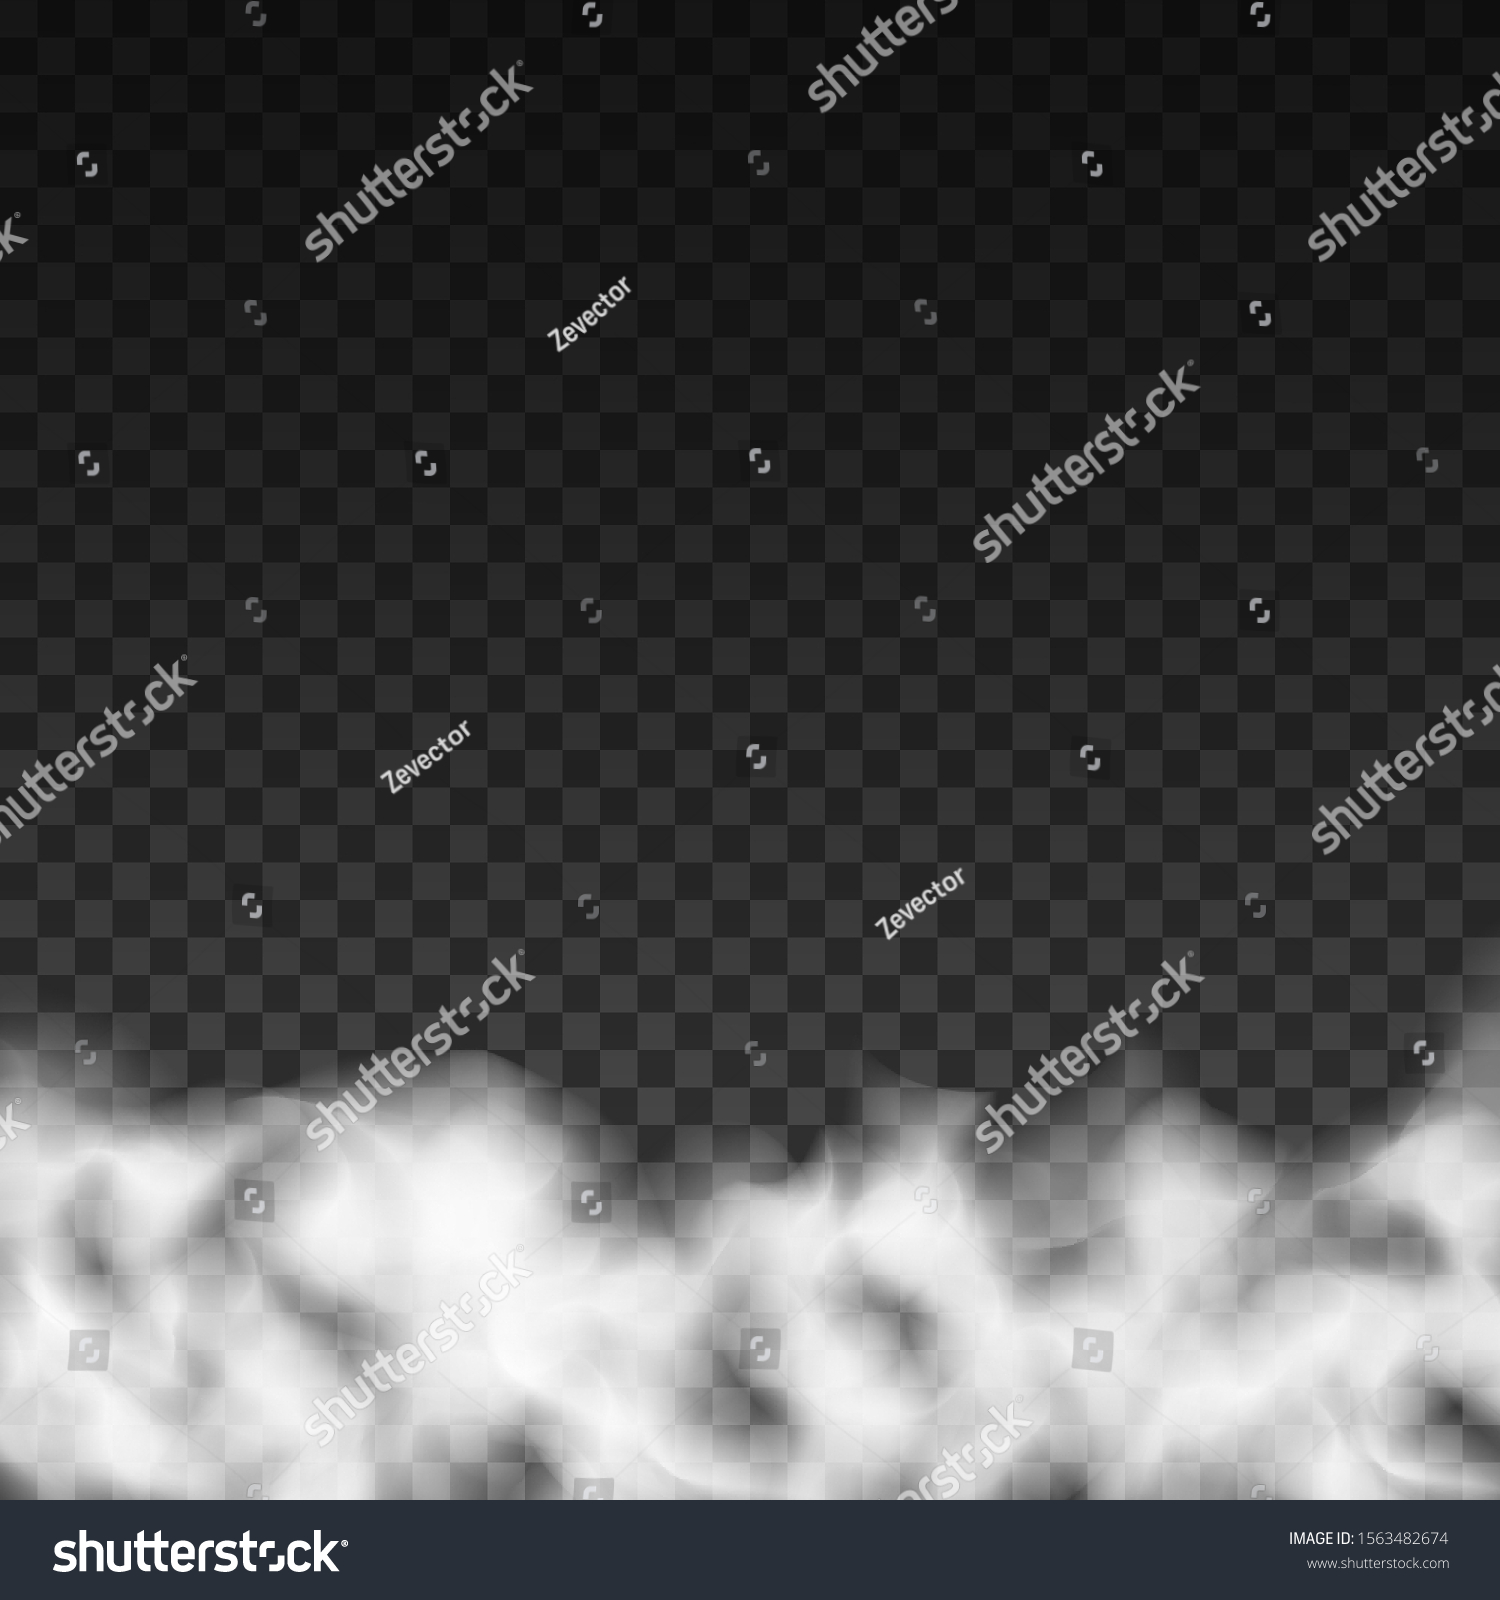 Fog or smoke isolated transparent special effect. White vector cloudiness, mist or smog background. Vector illustration - stock vector #1563482674